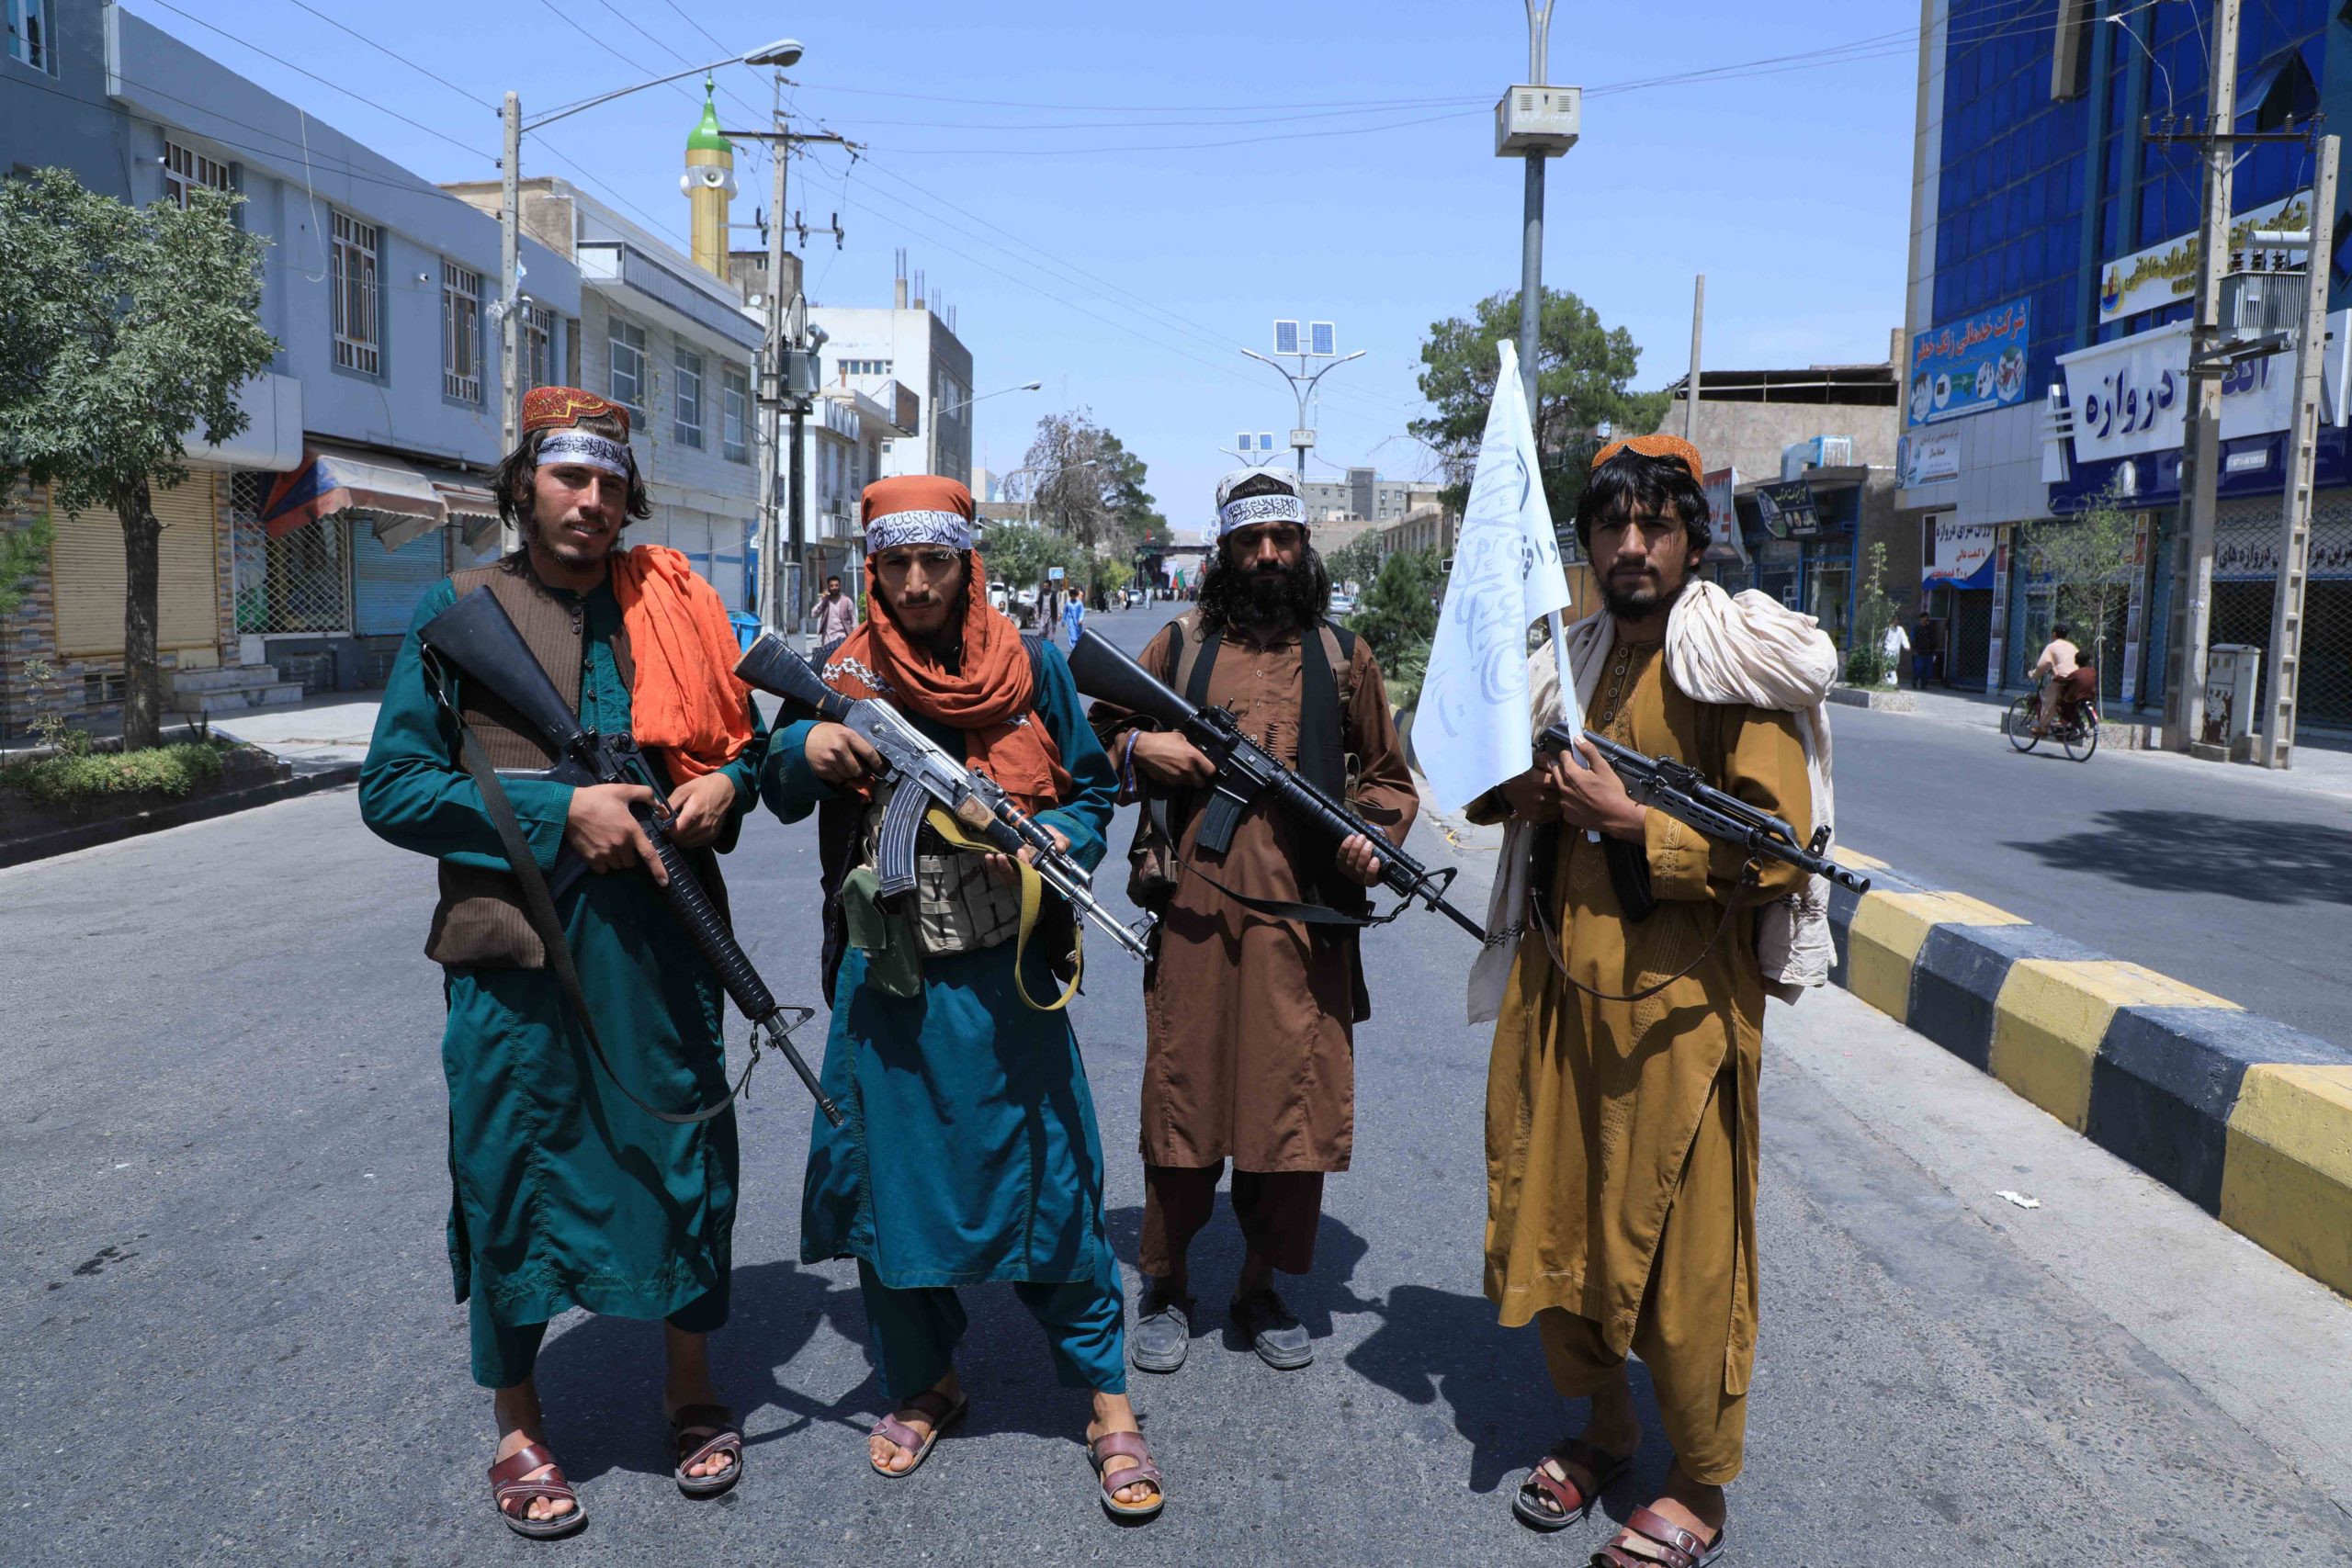 Taliban fighters stand guard along a road near the site of an Ashura procession which is held to mark the death of Imam Hussein, the grandson of Prophet Mohammad, along a road in Herat on August 19, 2021, amid the Taliban's military takeover of Afghanistan. (Photo by AREF KARIMI/AFP via Getty Images)